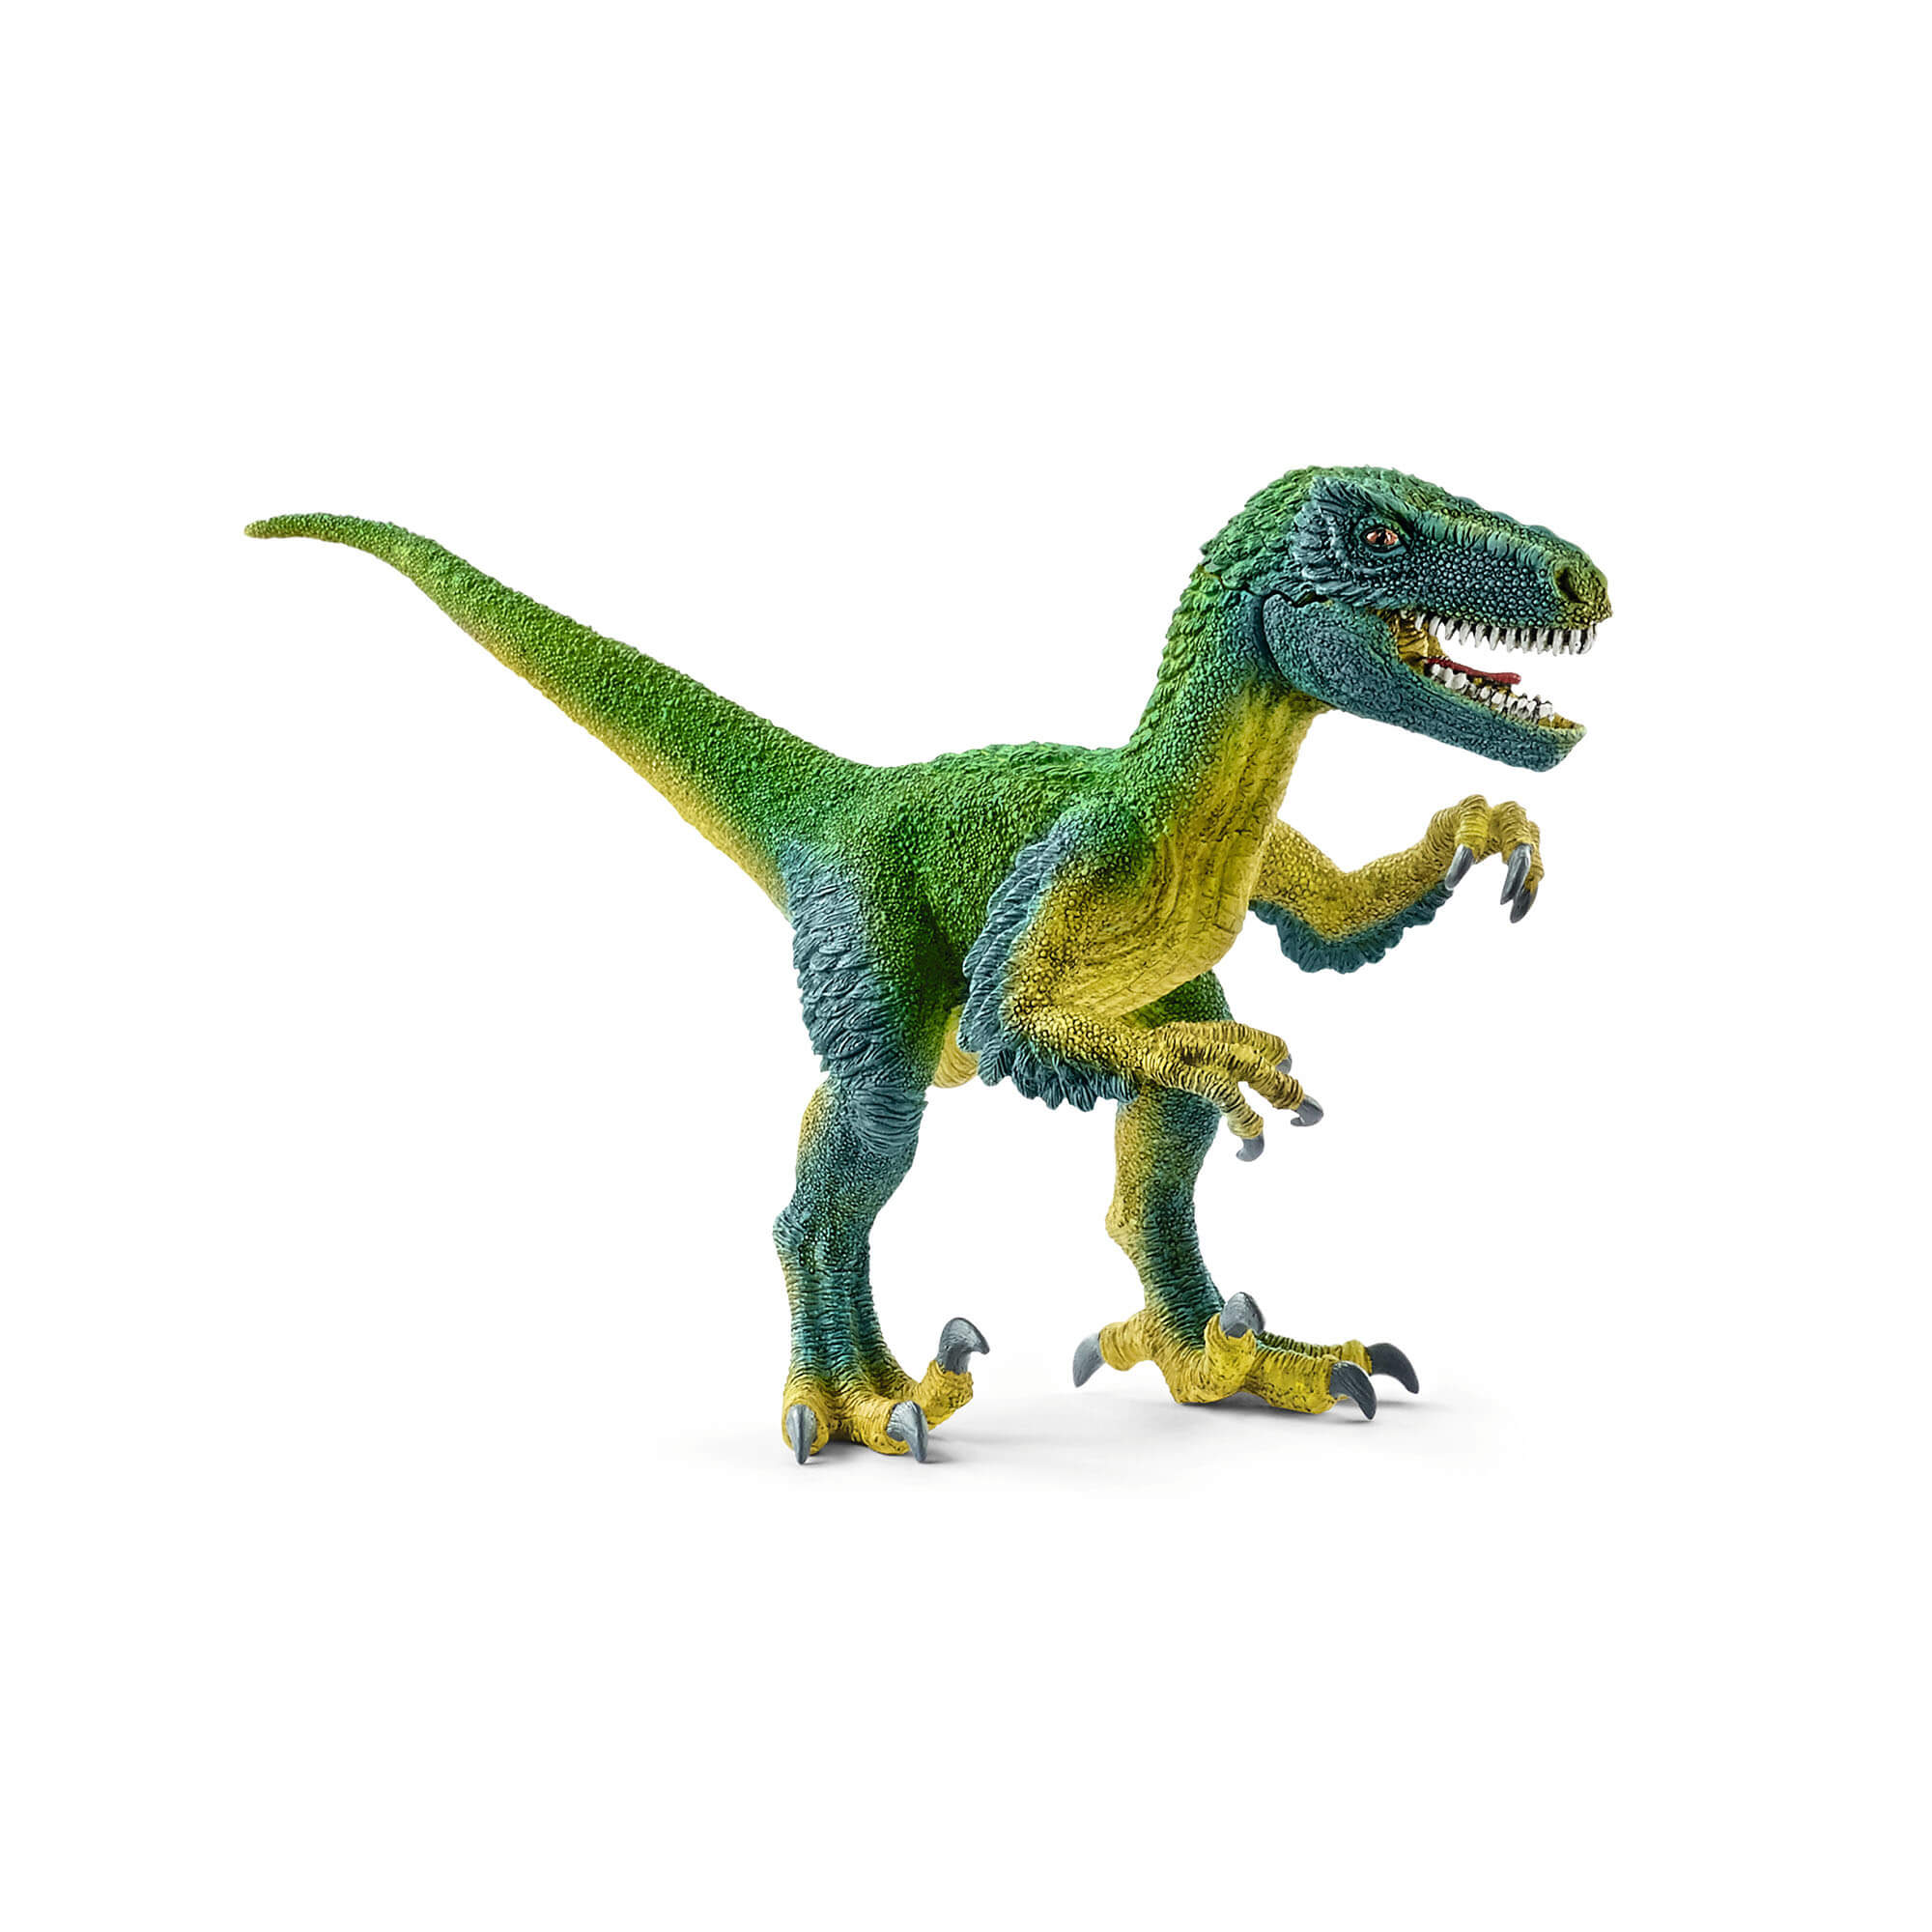 Front quarter view of the Schleich Velociraptor Dinosaur Figure featured in dark and light greens with touches of yellow highlights. 